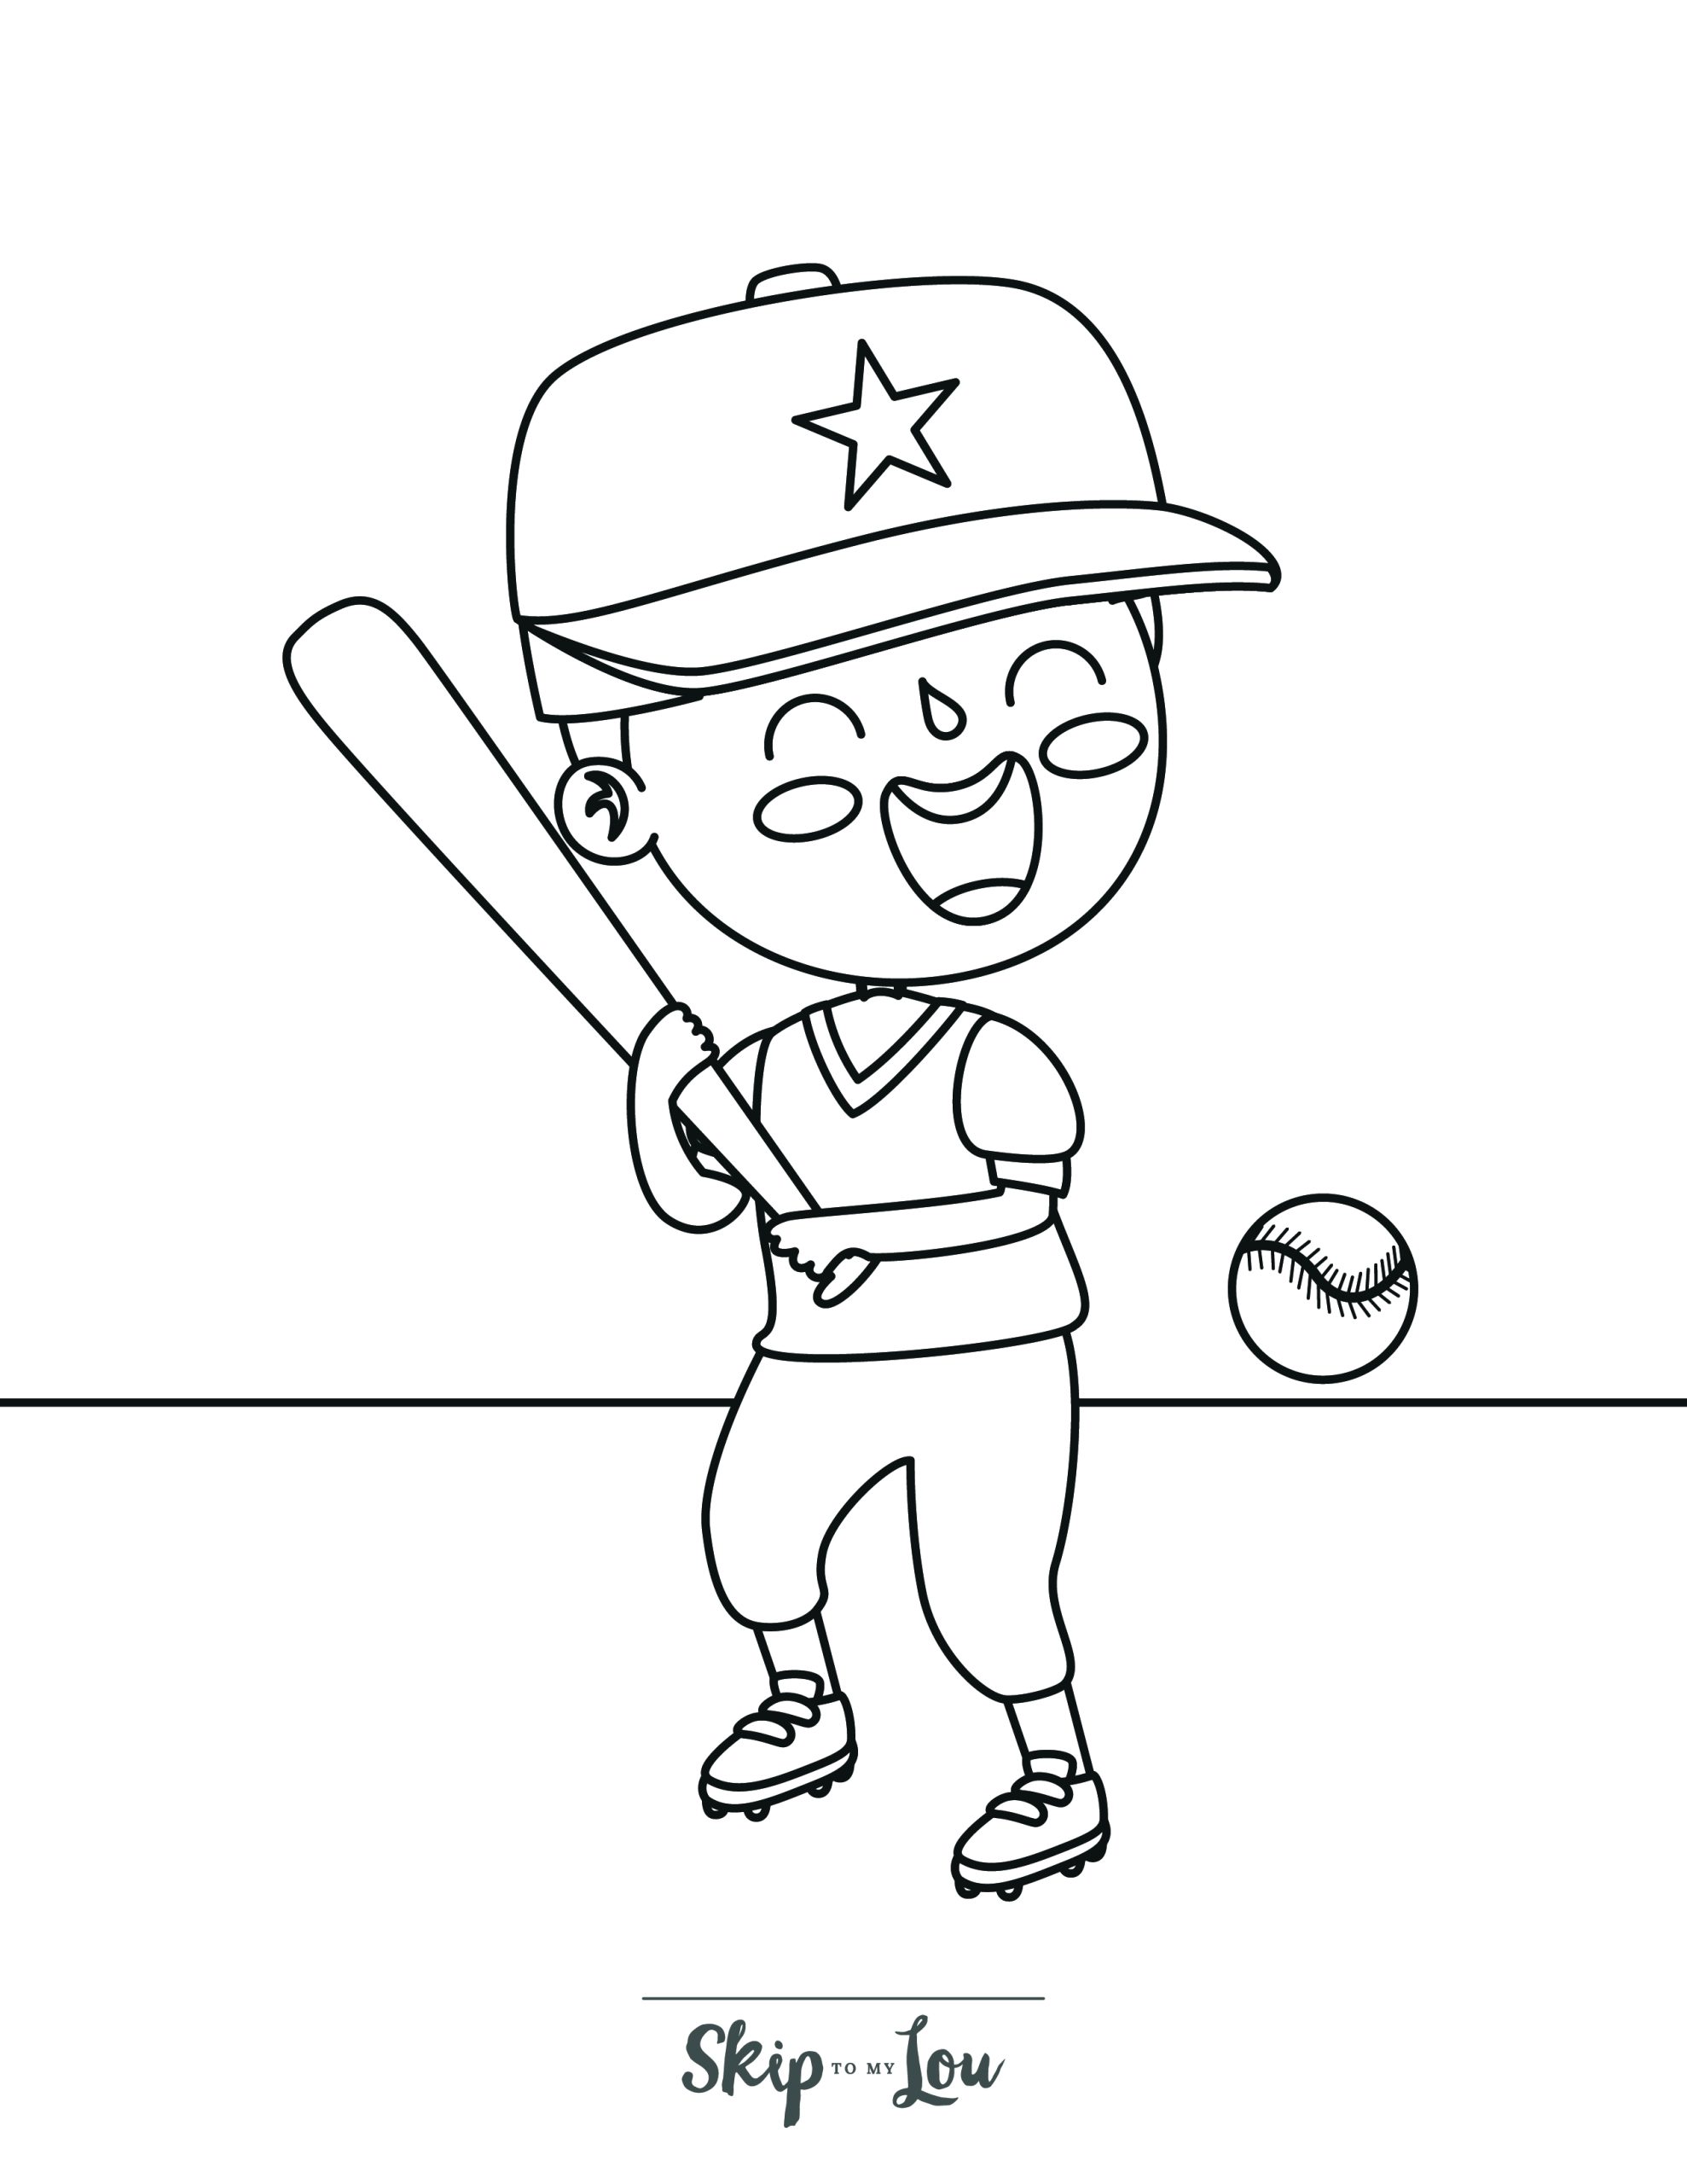 Baseball Coloring Page 1 - A line drawing of a little baseball player. He is ready to hit a baseball coming towards him with his bat.